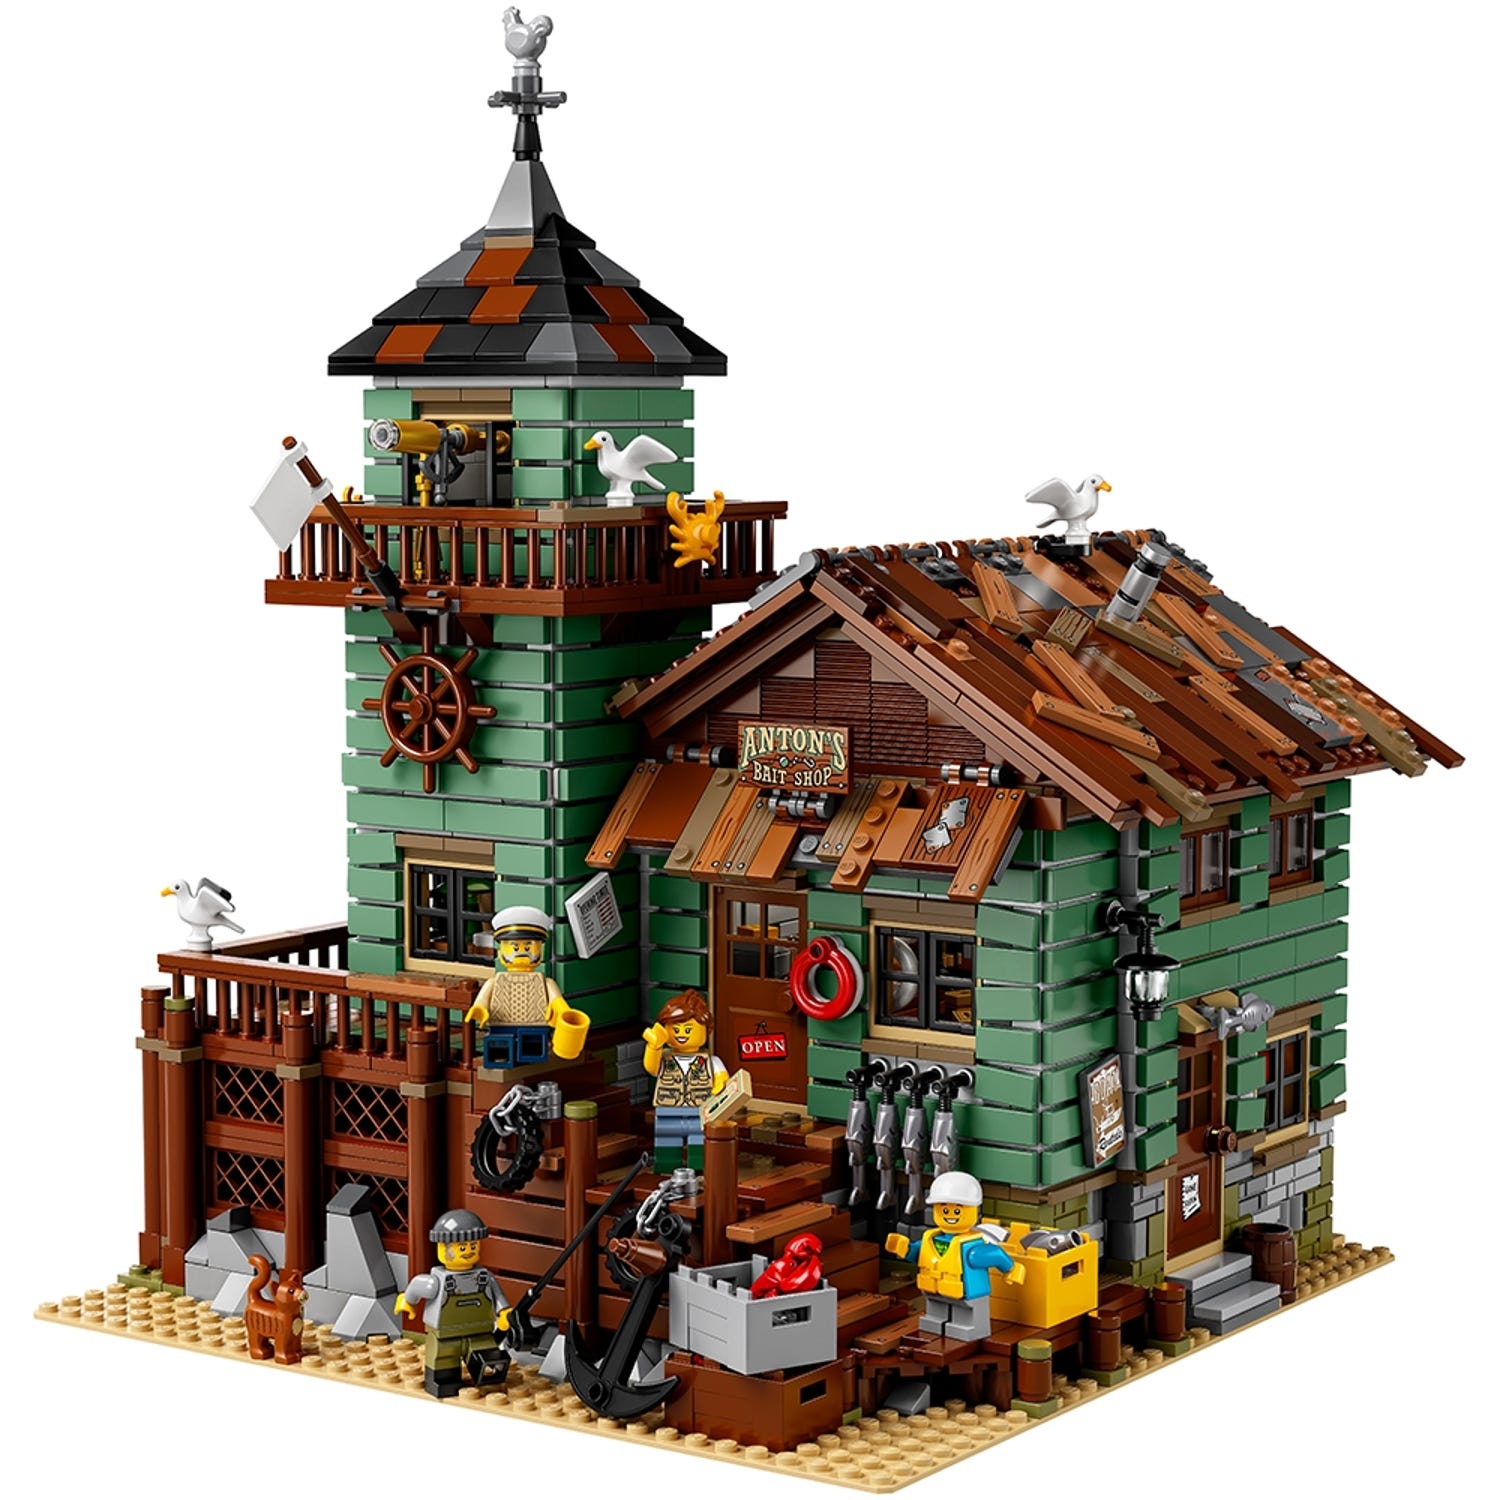 Old Fishing Store 21310, Ideas